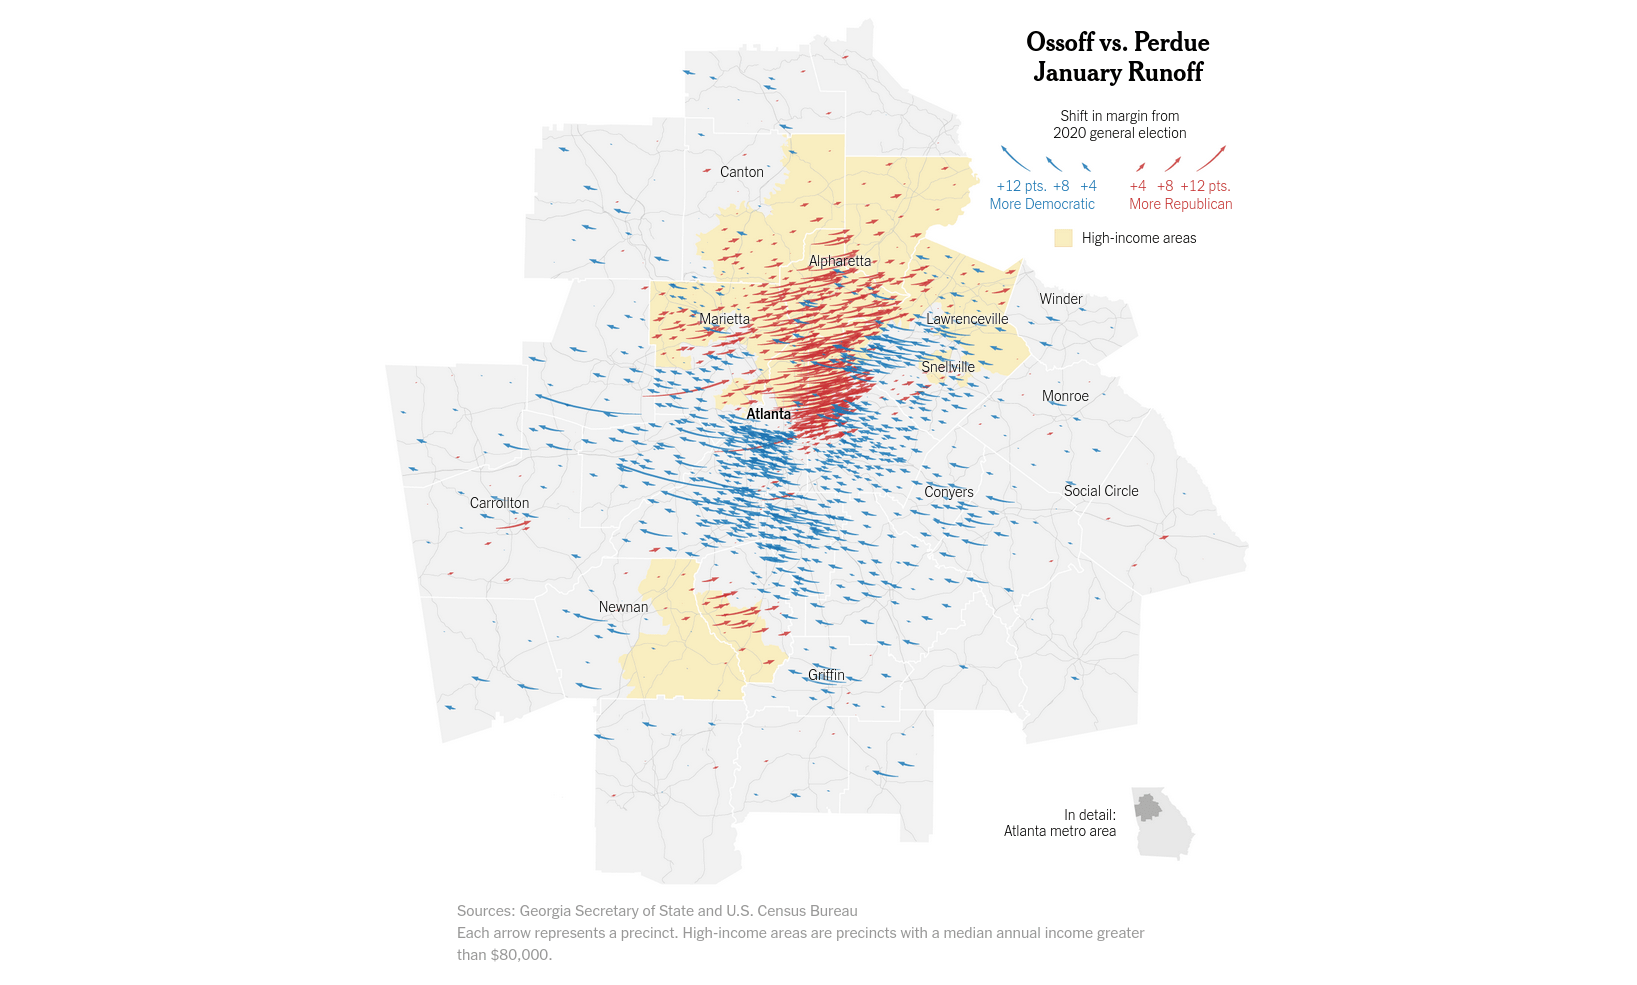 A New York Times map showing changes in voting patterns in Georgia